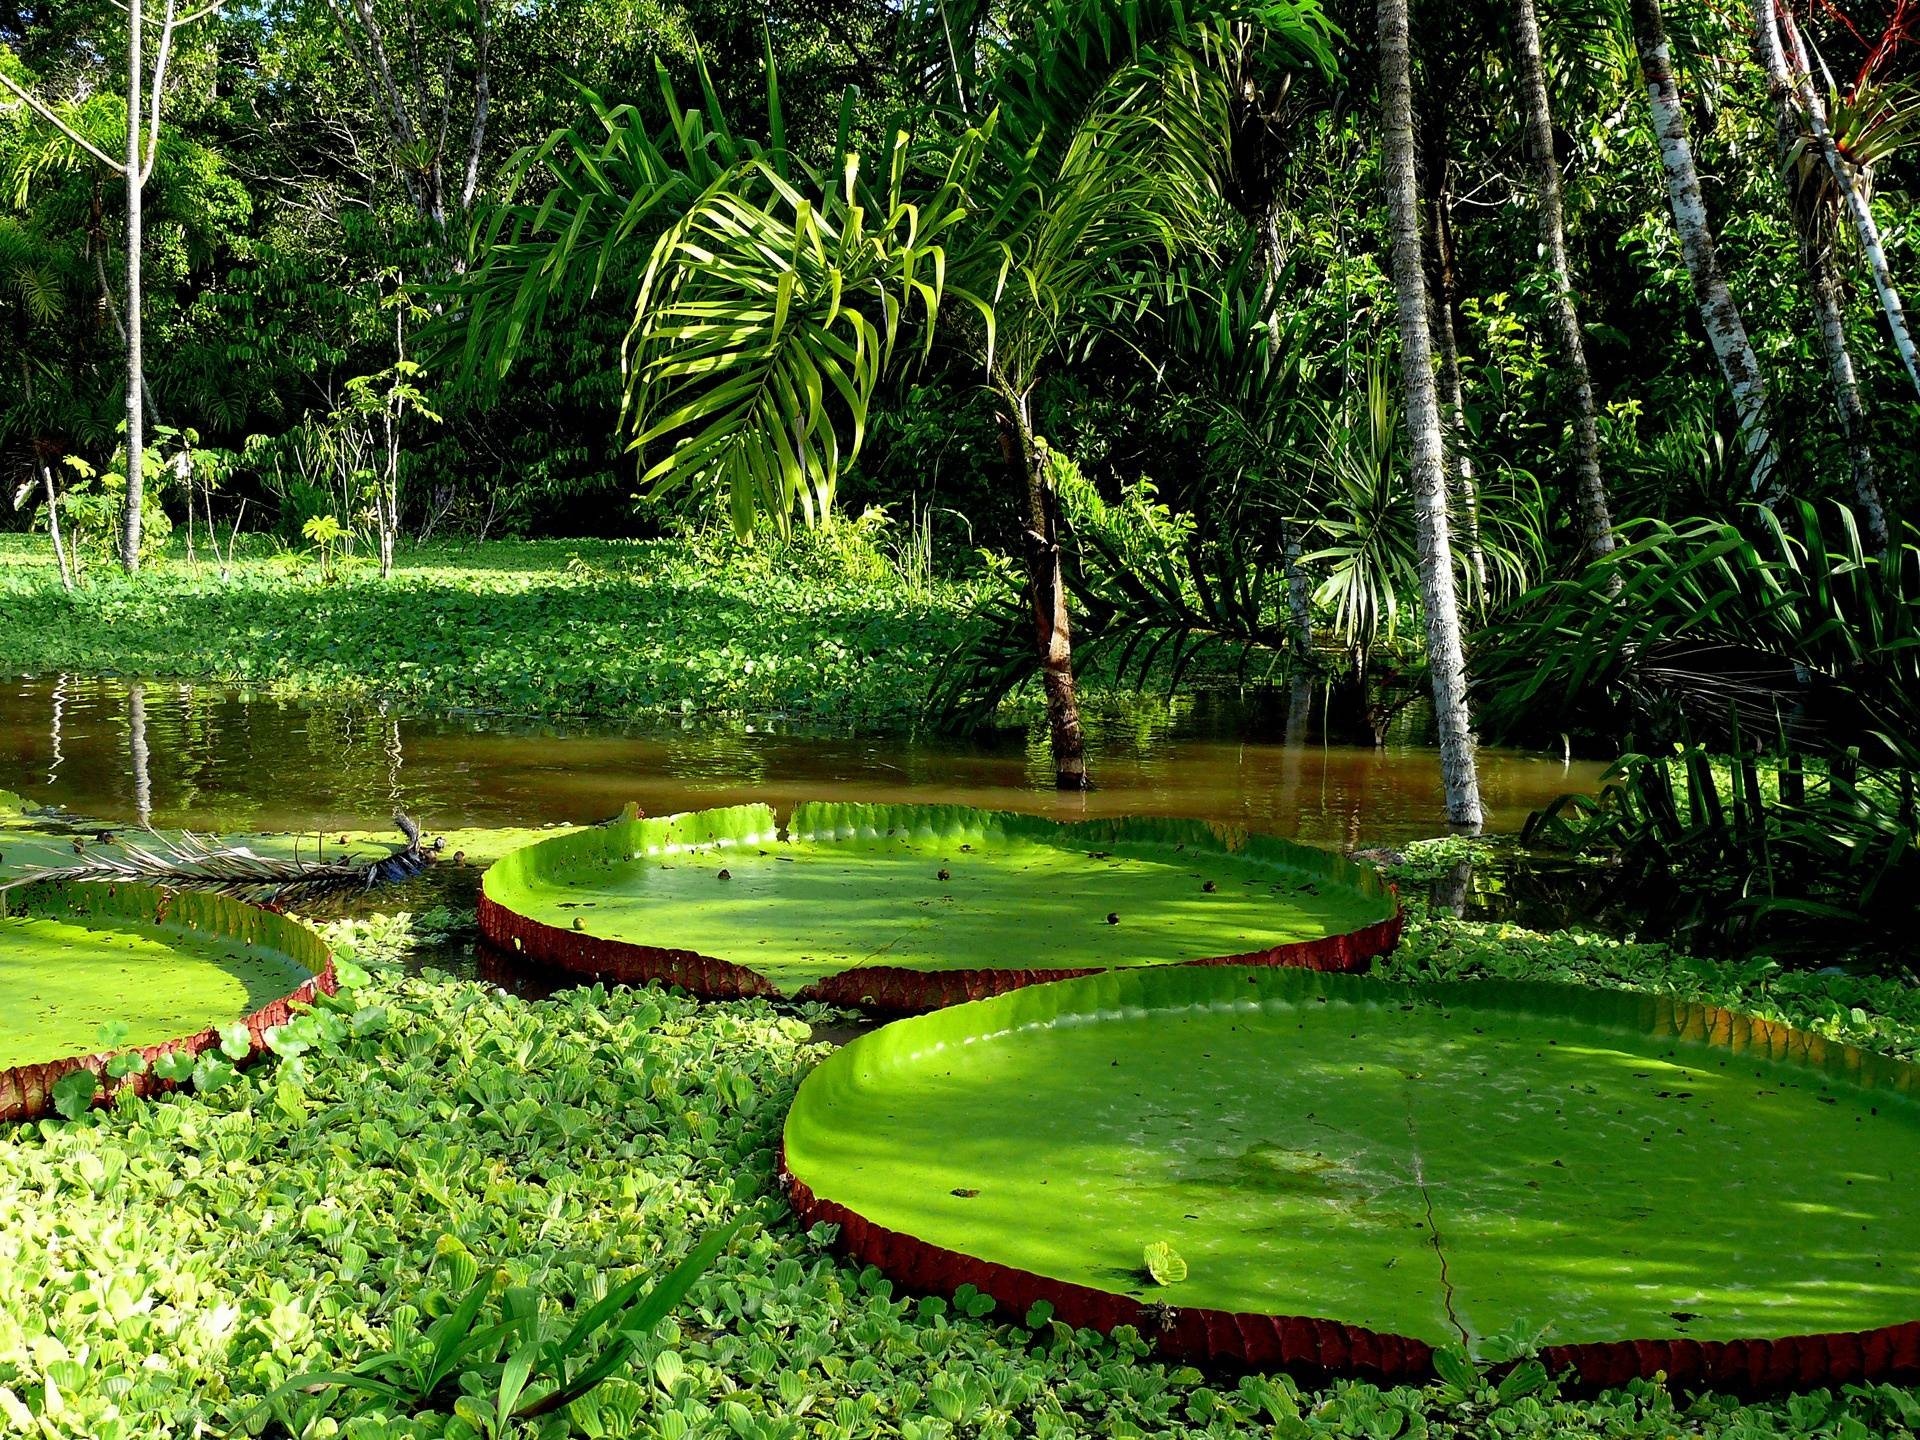 Giant Amazon Water Lily Pad